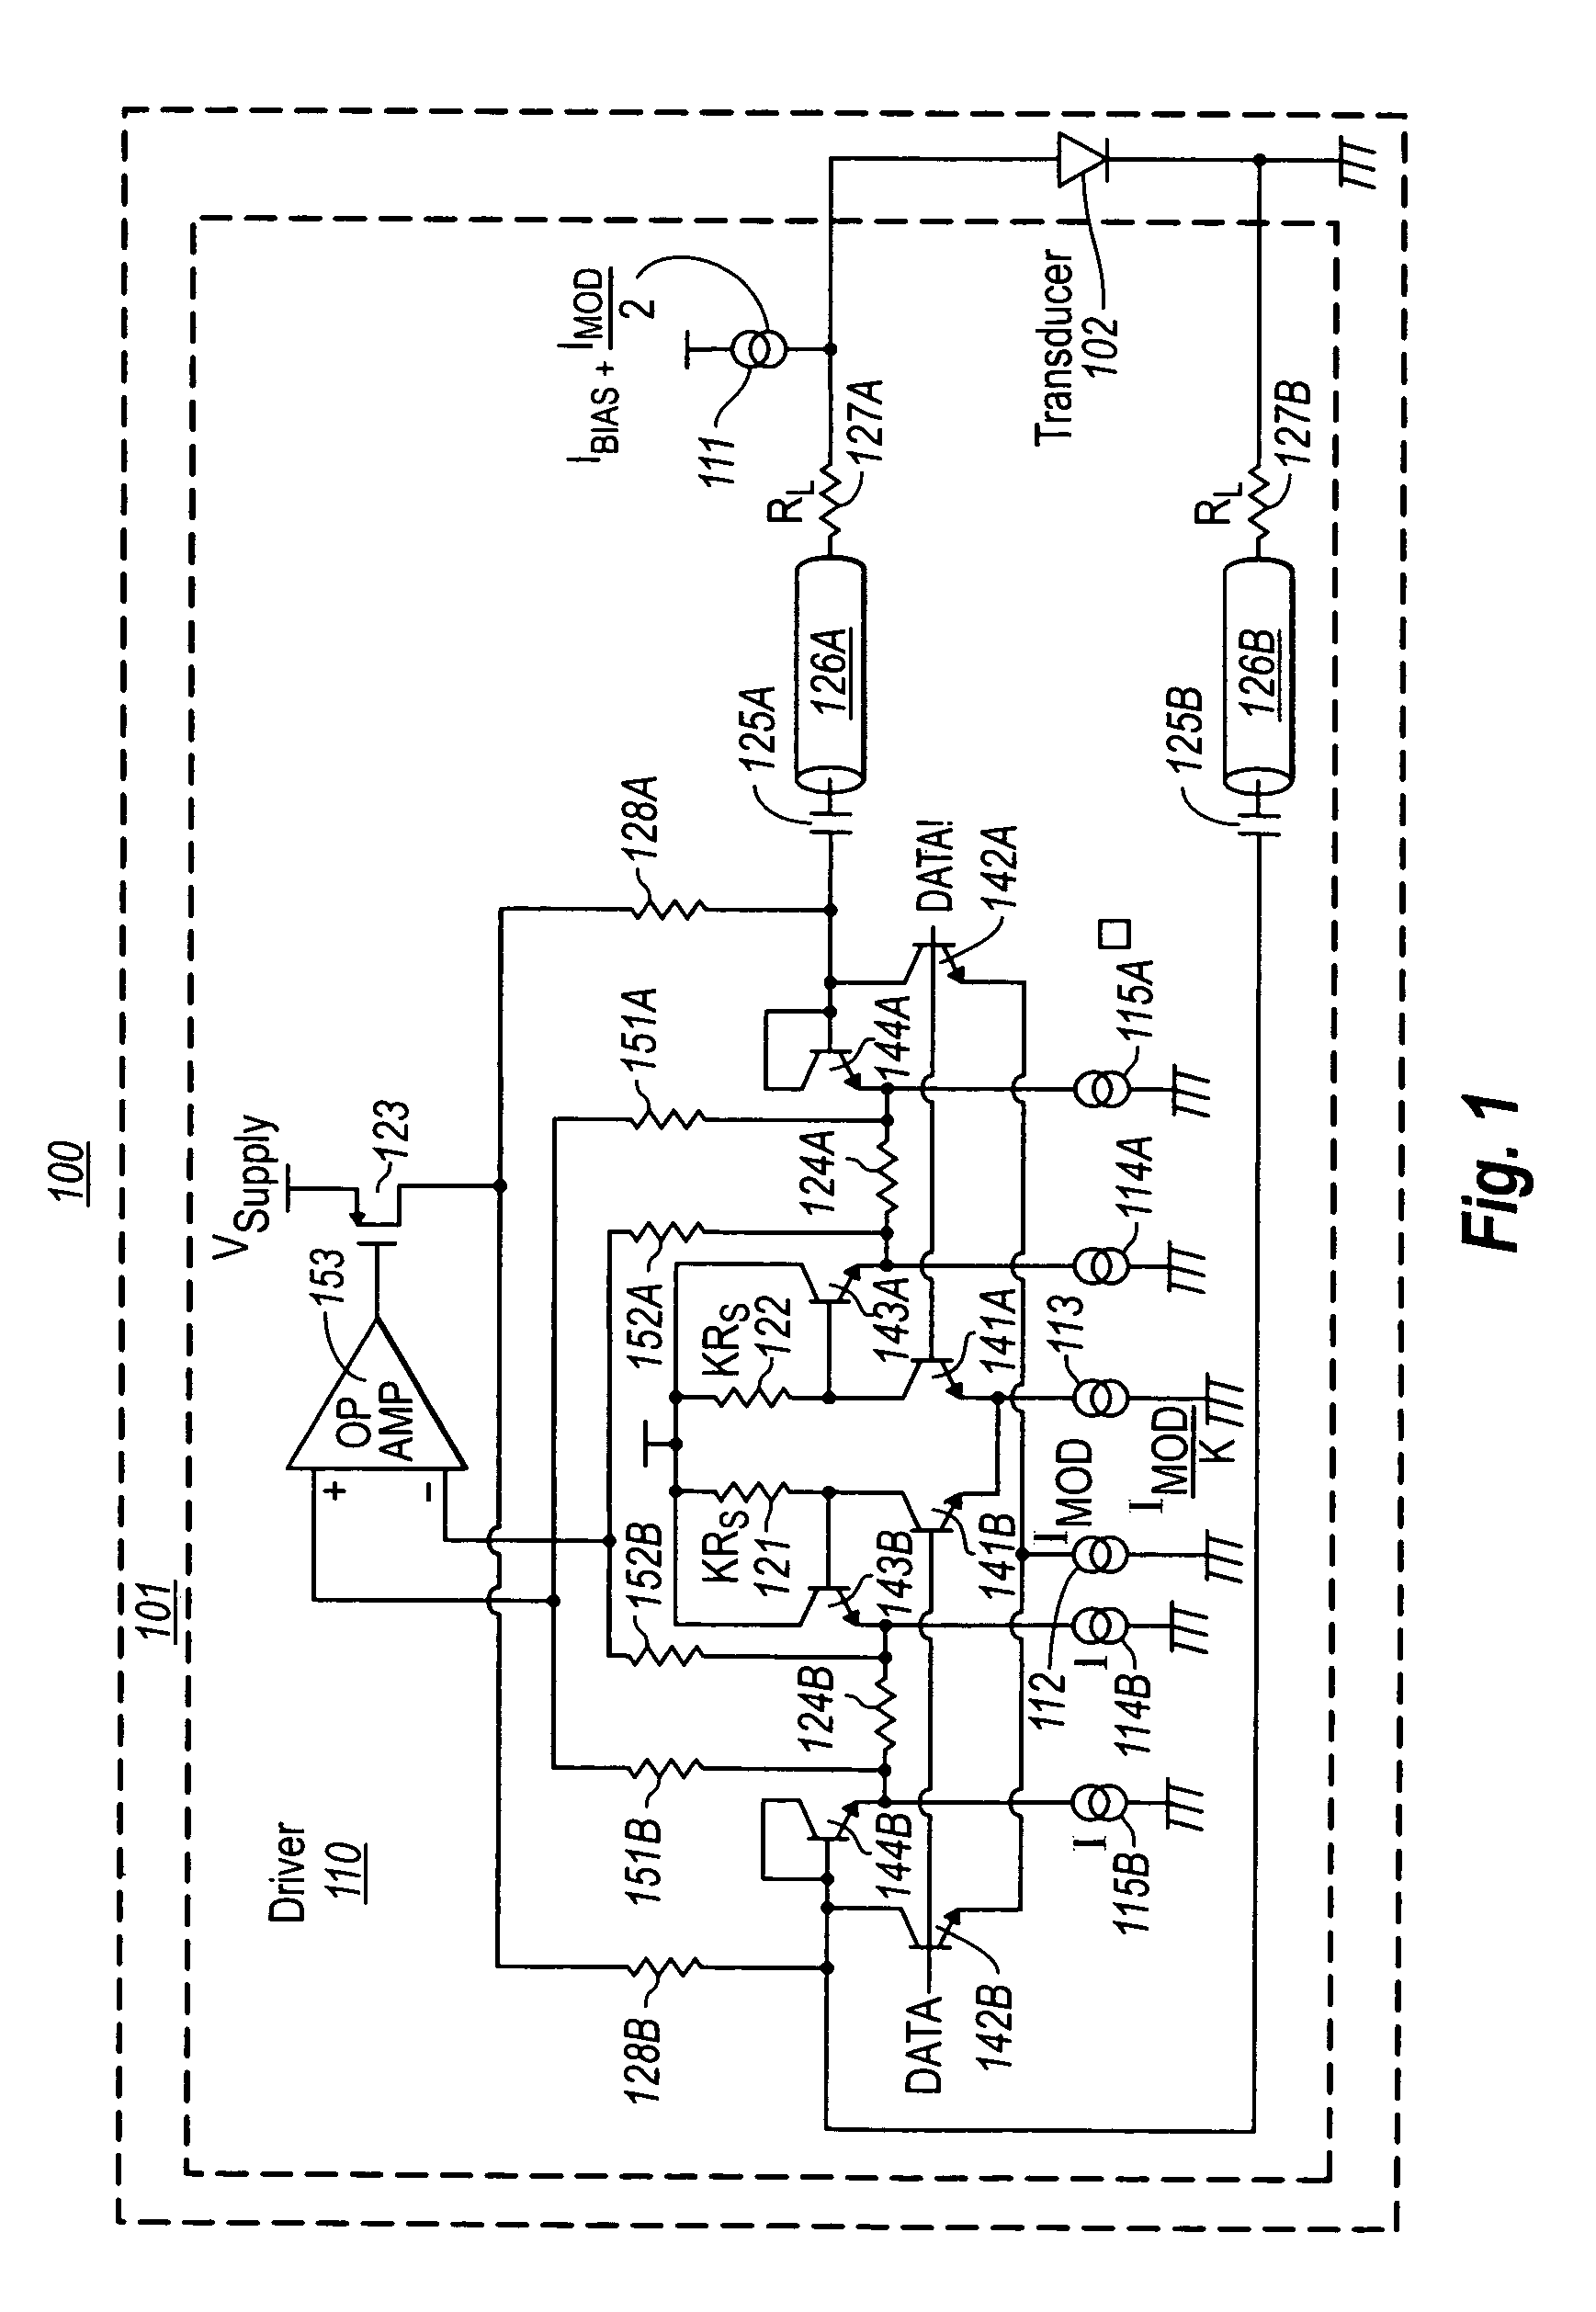 High efficiency active matching electro-optic transducer driver circuit operable with low supply voltages